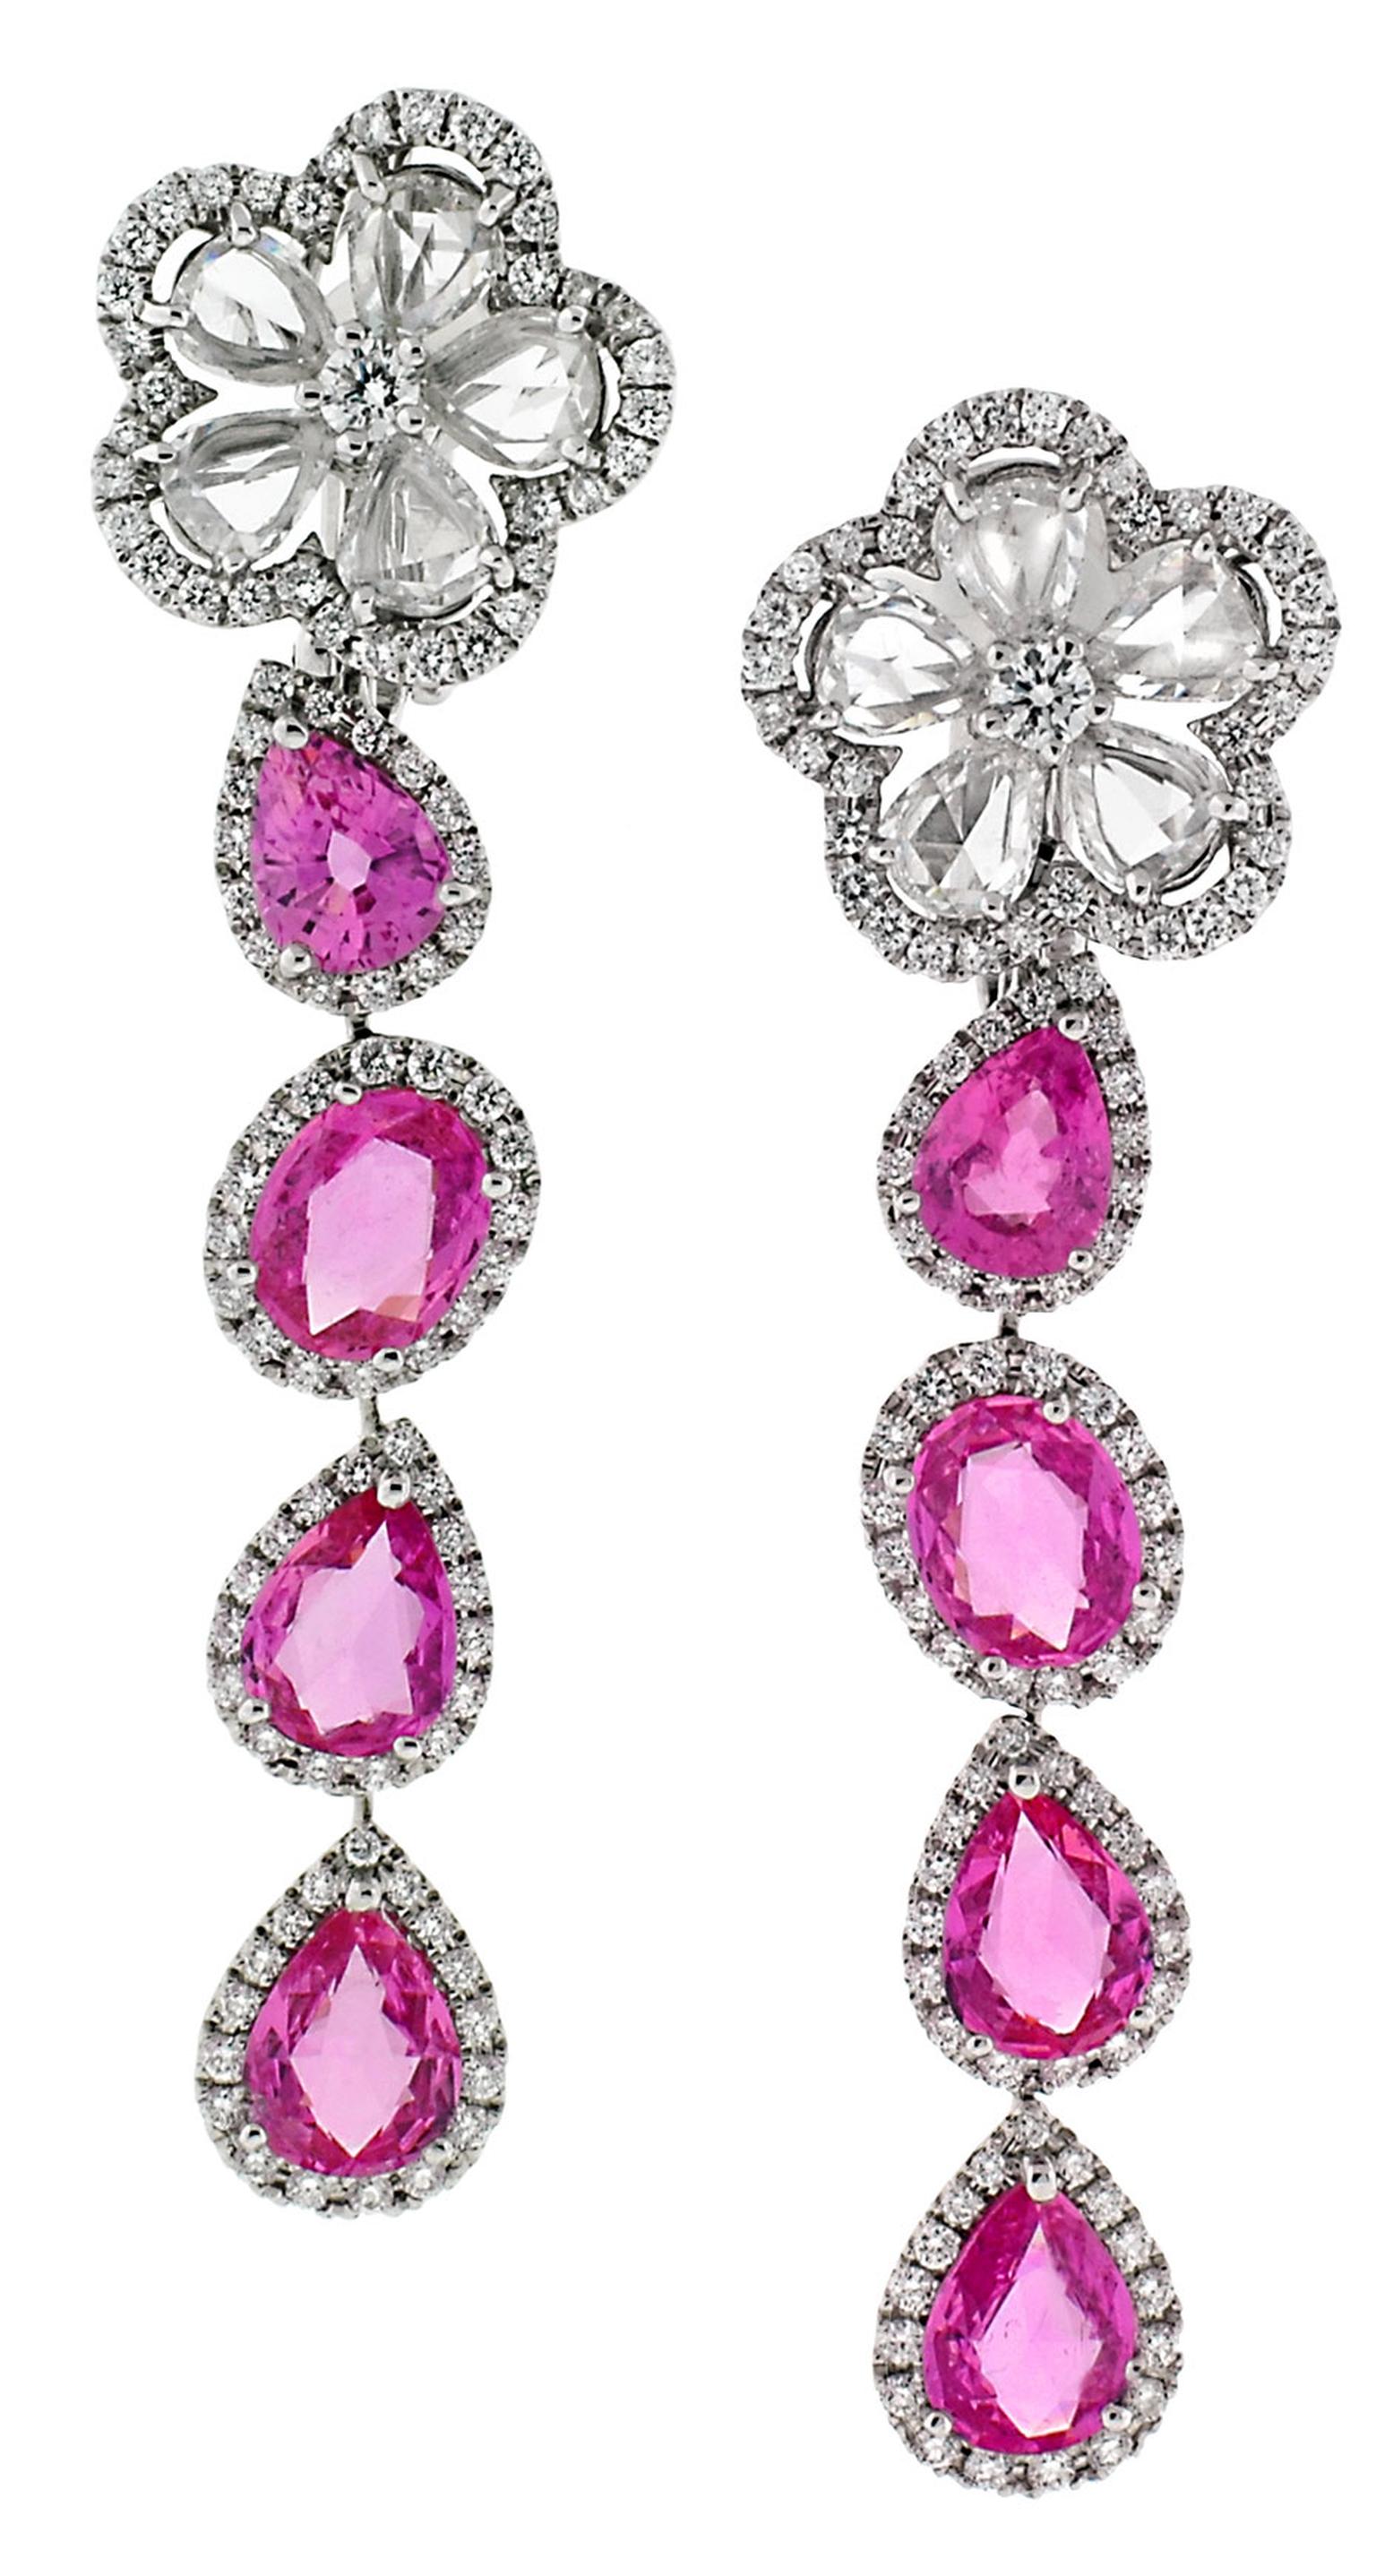 Kelly Preston also wore matching pink sapphire and diamond Avakian earrings